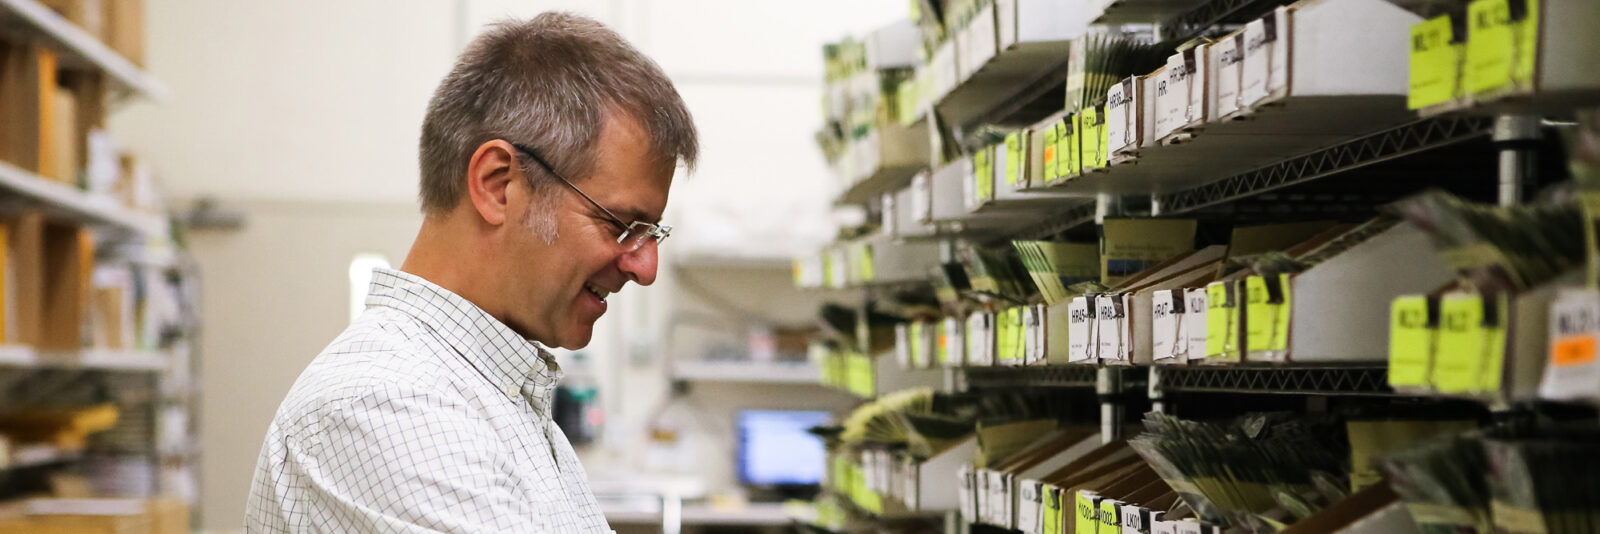 A man smiles and looks at shelves with seed packets in files